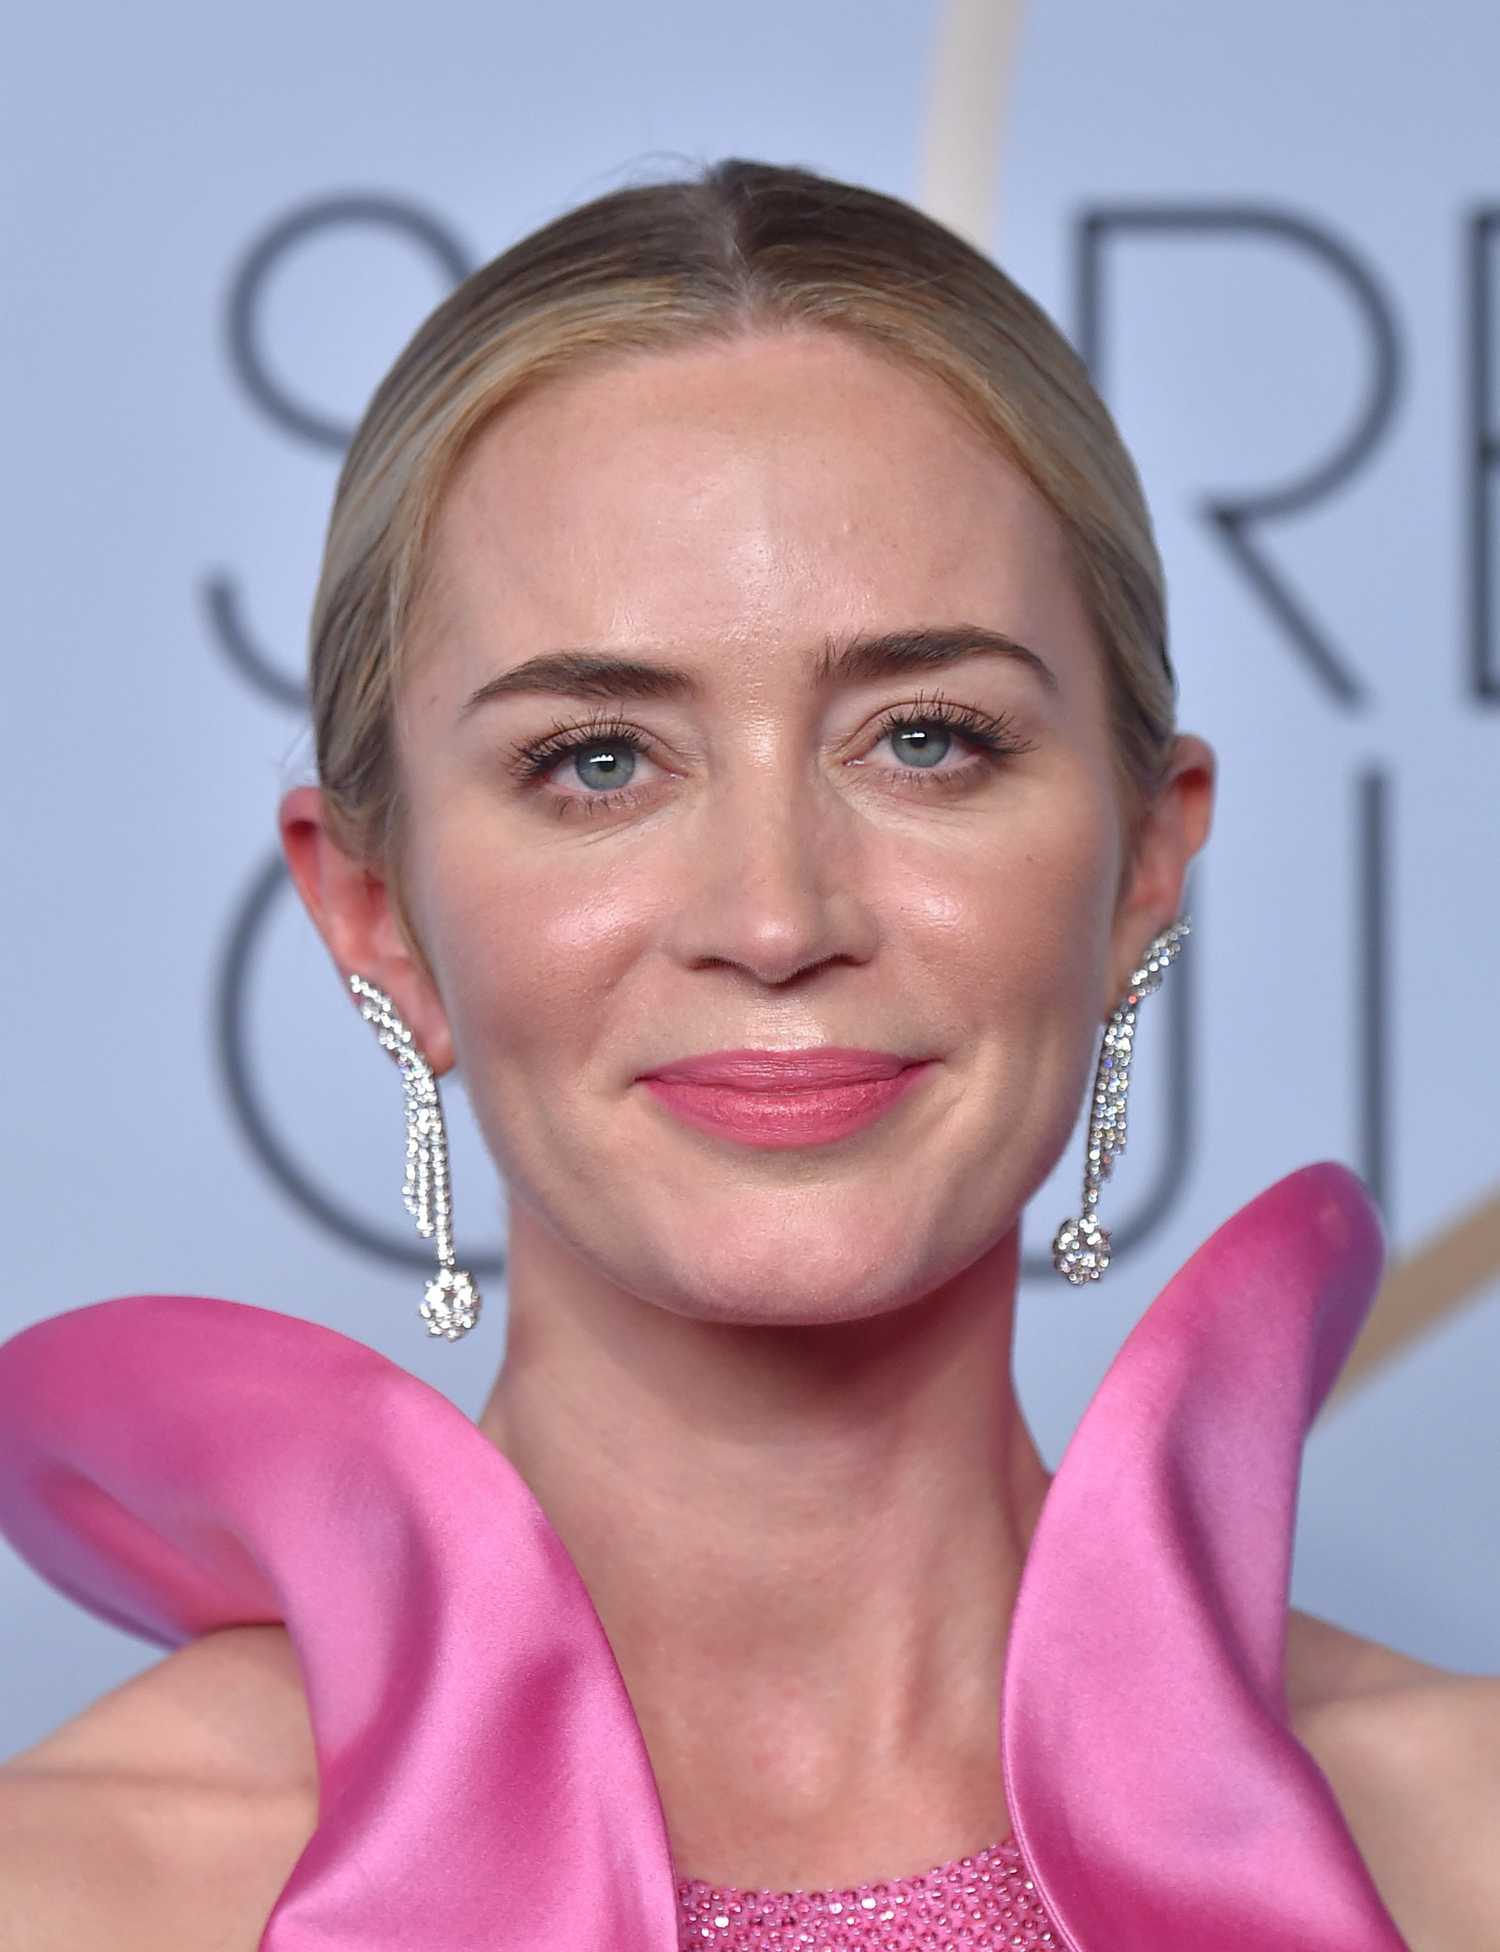 Emily_Blunt_-_25th_Annual_Screen_Actors_Guild_Awards_Pressroom_in_Los_Angeles_01272019-43.JPG